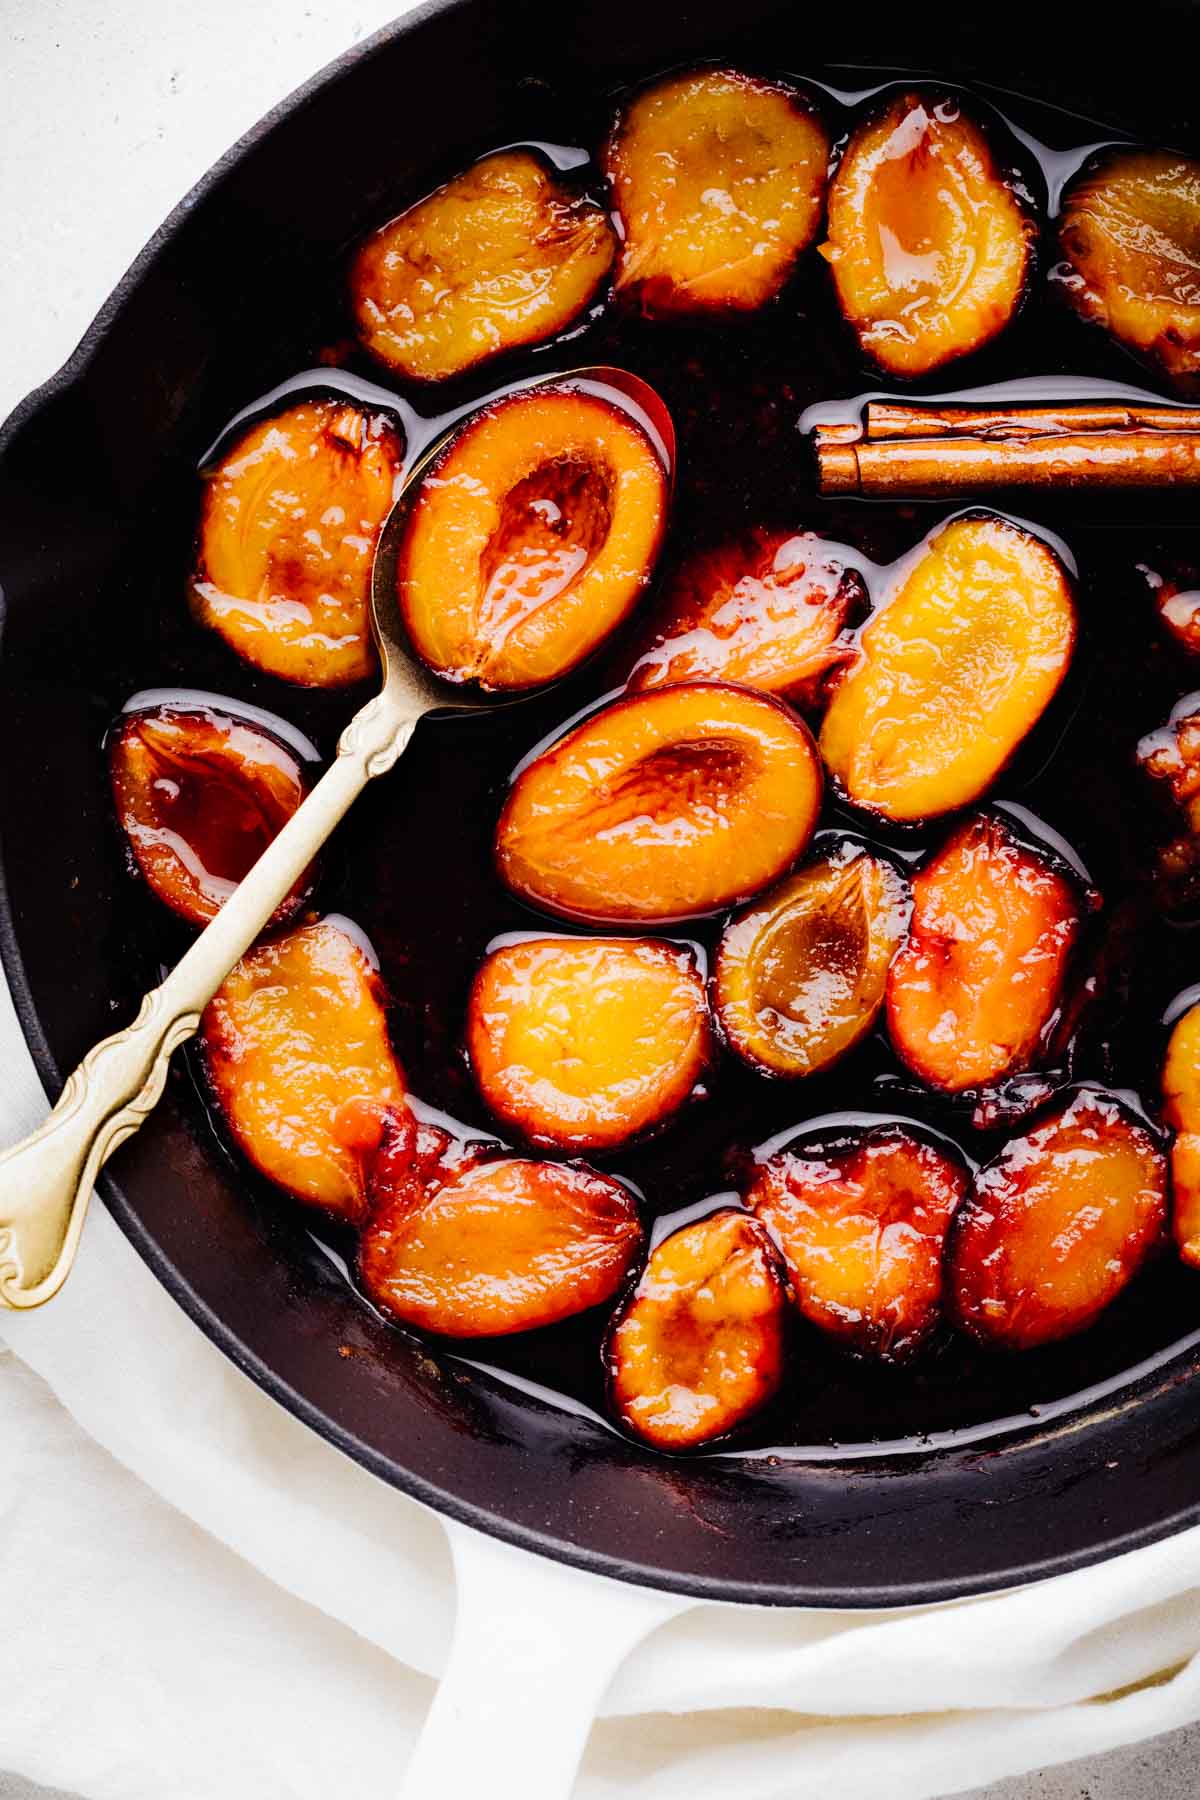 Orange and red color plum halves in a syrupy liquid with the inside facing up in a black skillet with a golden spoon with one plum halve in it.